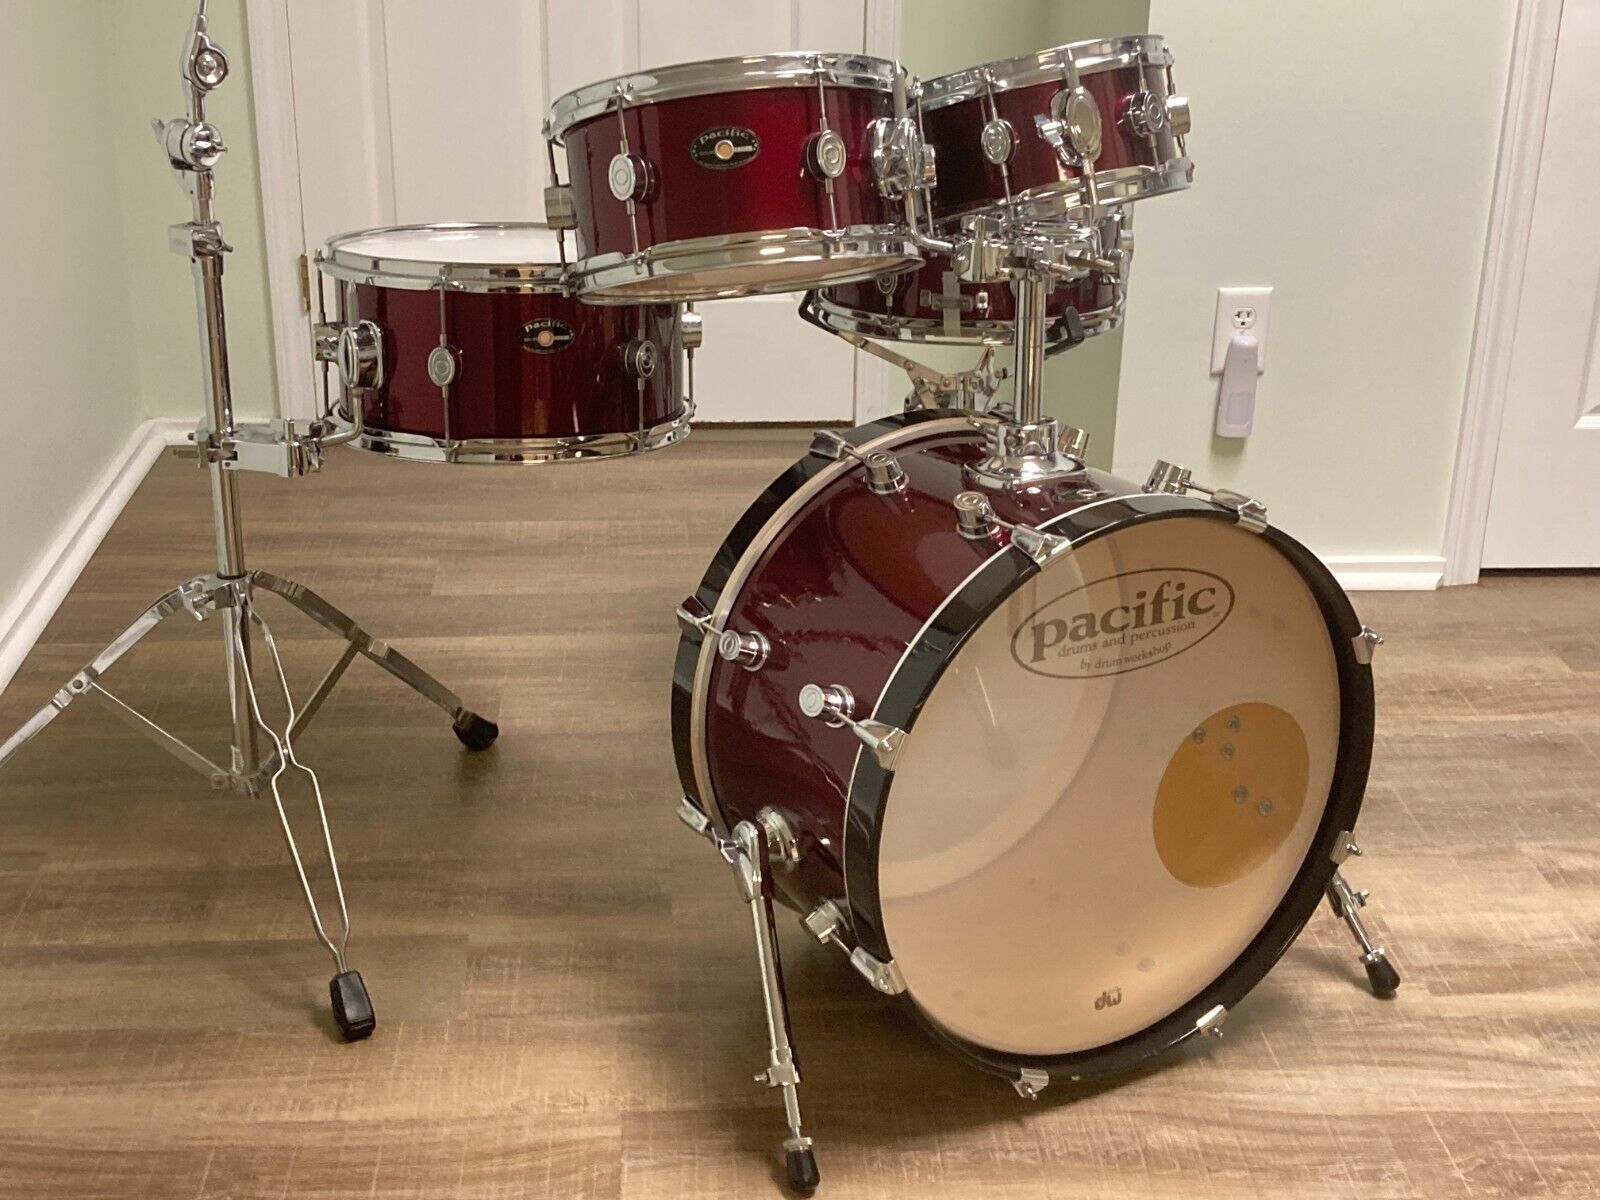 PDP by DW Pacific Chameleon Compact Travel Drum Set 2000s – Wine Red 2